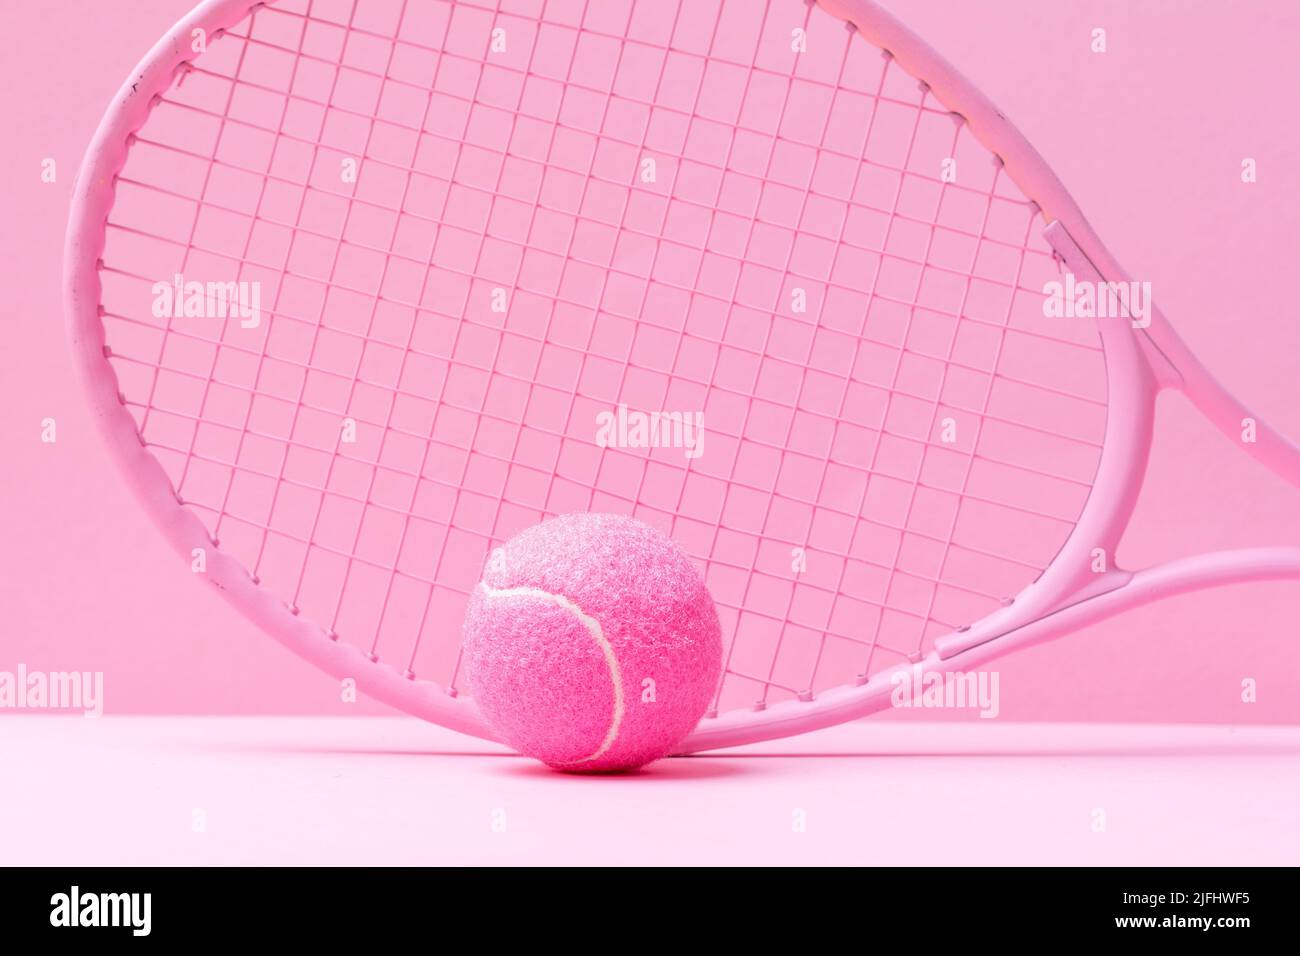 Pink tennis racket and pink ball on pink background. Horizontal sport theme poster, greeting cards, headers, website and app Stock Photo